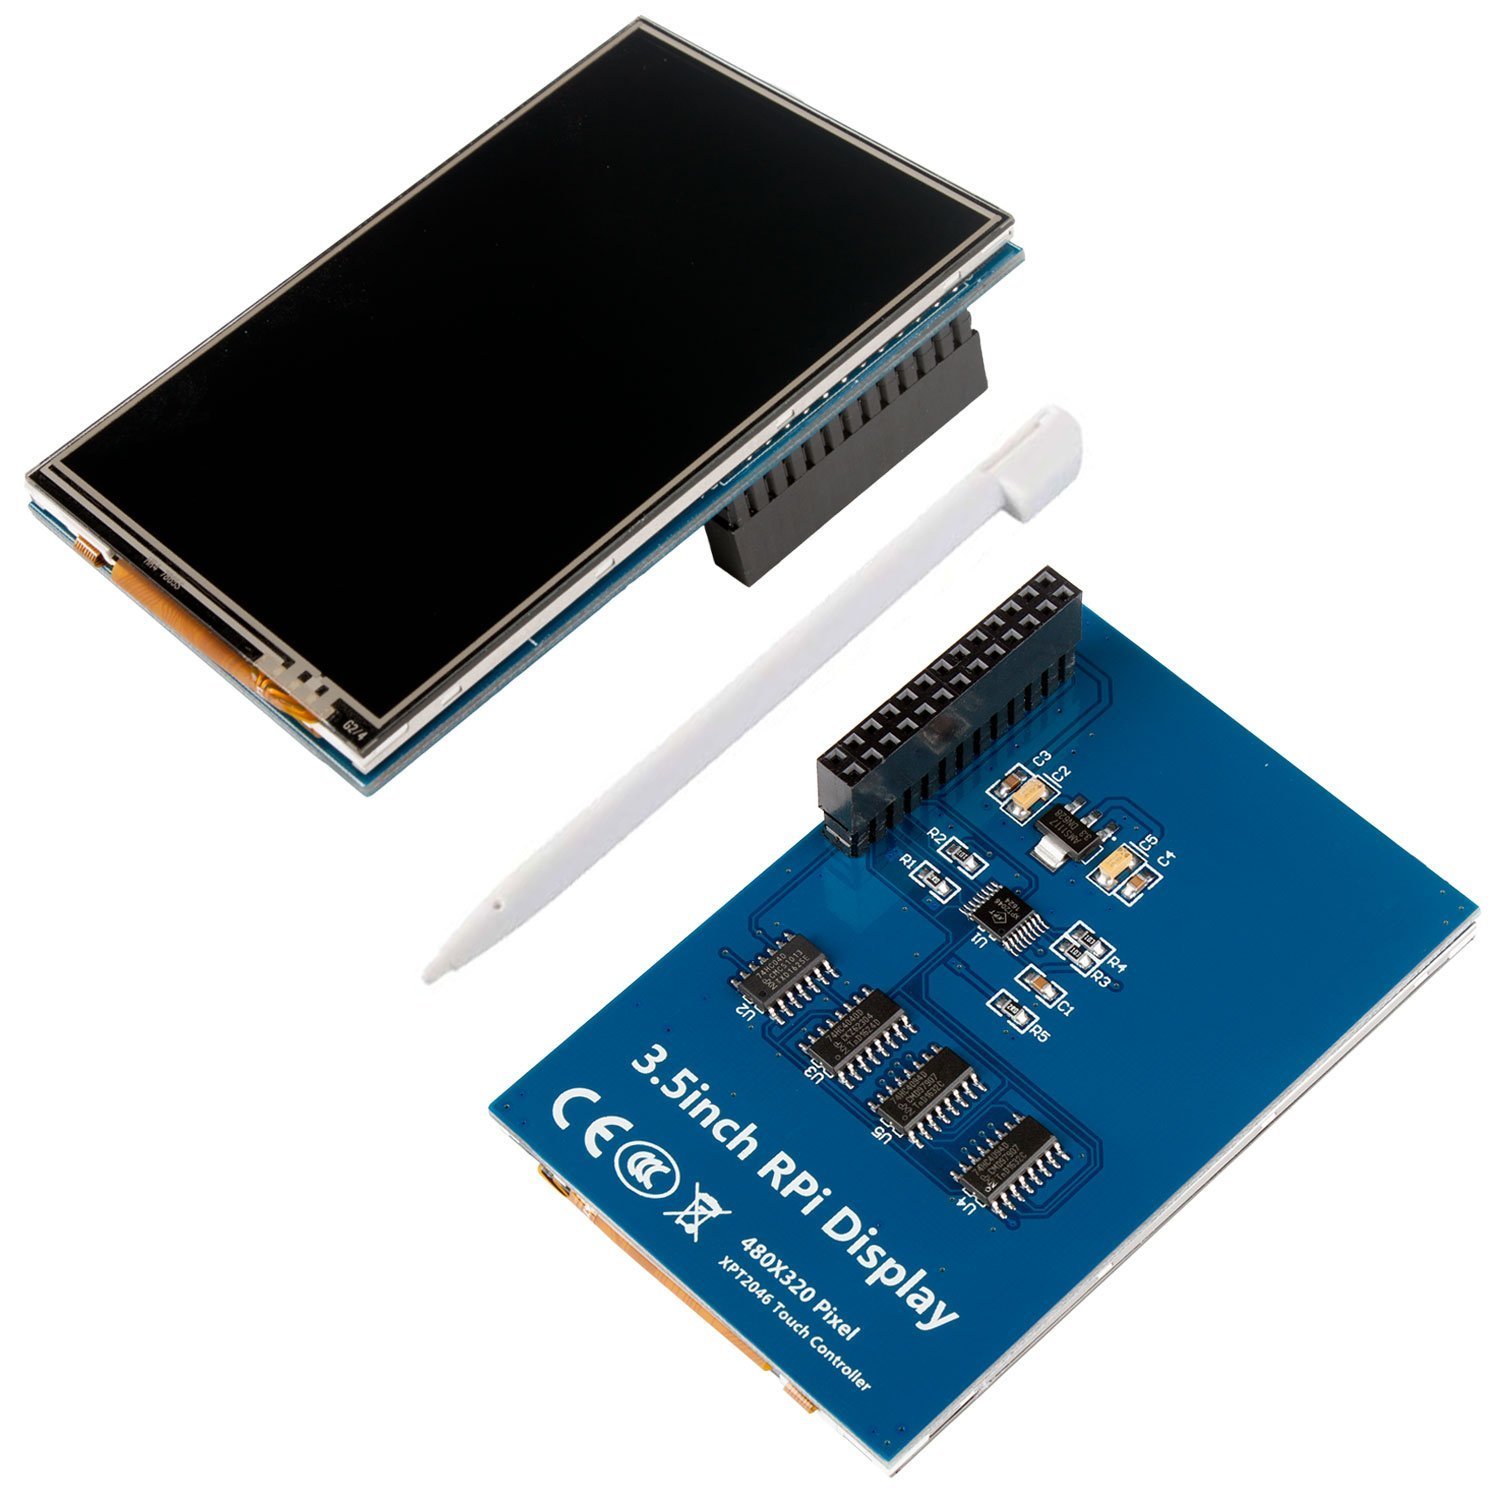 3.5 Inch TFT LCD Touch Display For Raspberry Pi V4.0 of 320*240 Resolutions 